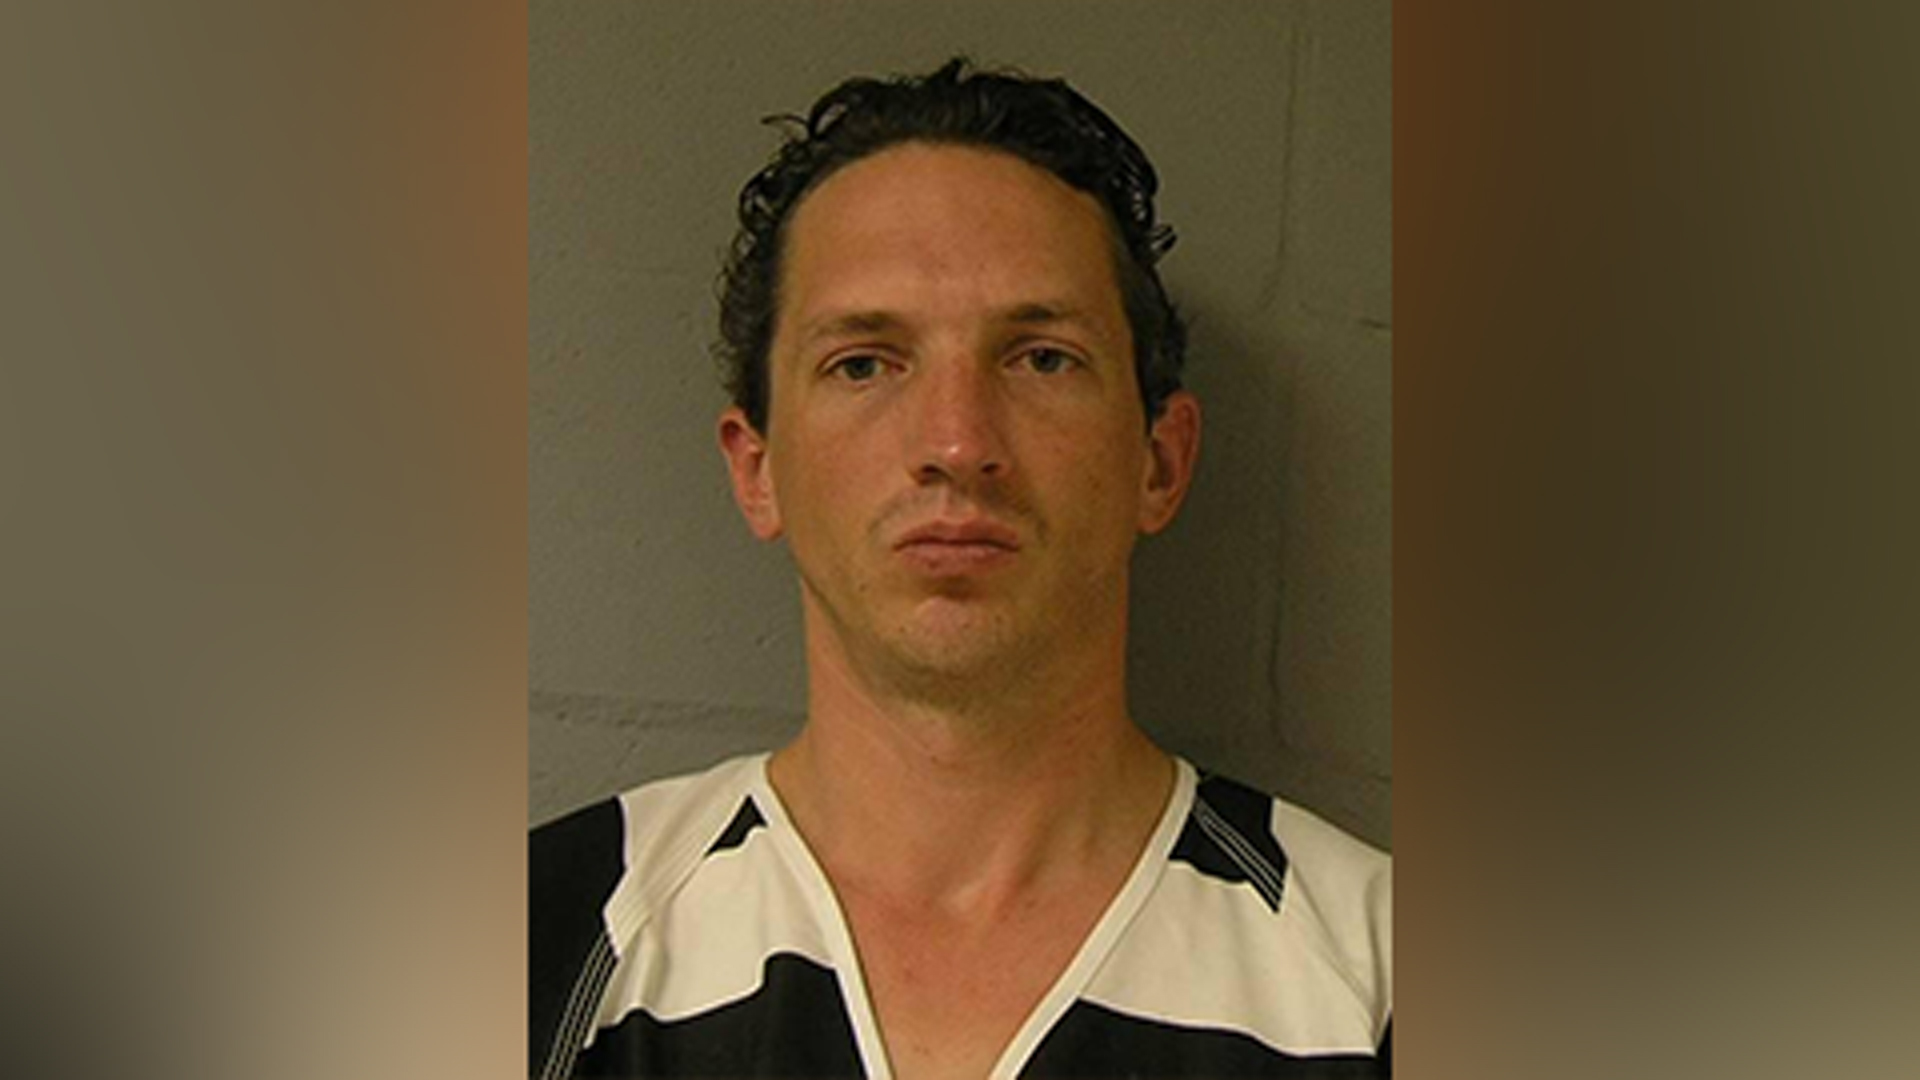 Israel Keyes: 'The Most Diabolical' Serial Killer You May Not Have Heard Of, Who Has Stumped the FBI